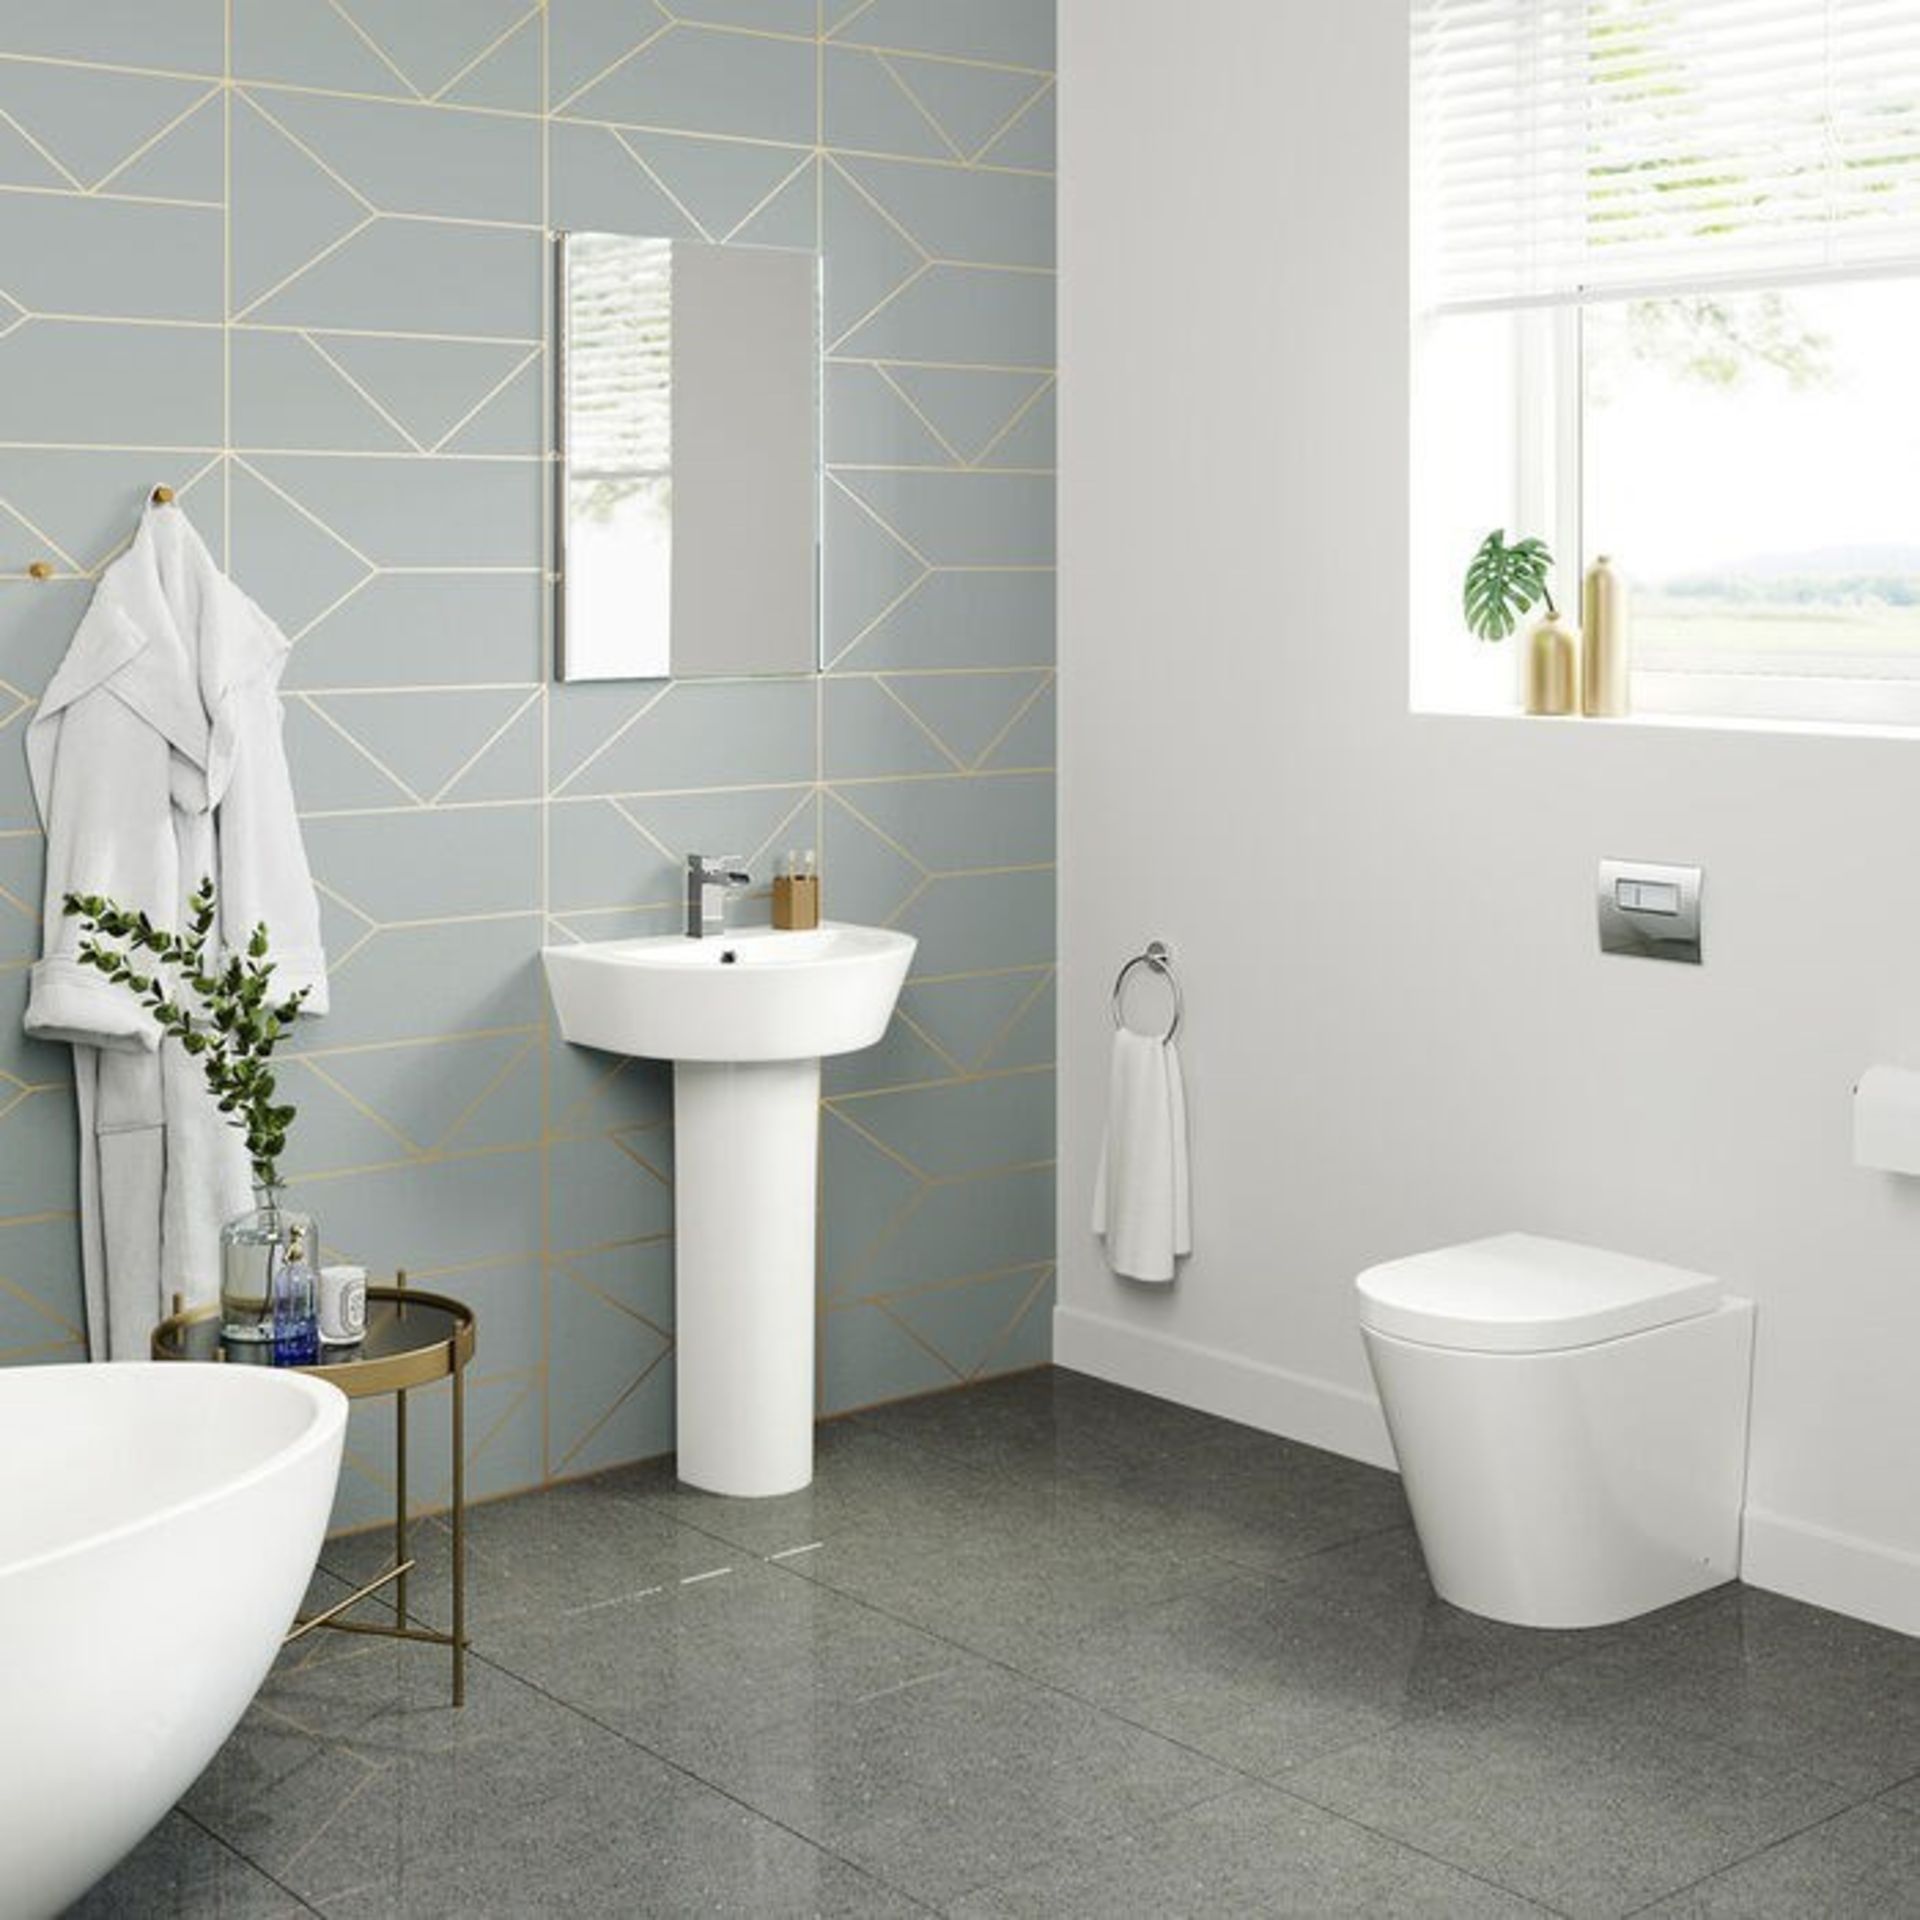 NEW & BOXED Lyon Back To Wall Toilet with Soft Close Seat. RRP £349.99 each. Our Lyon back to ... - Image 2 of 2